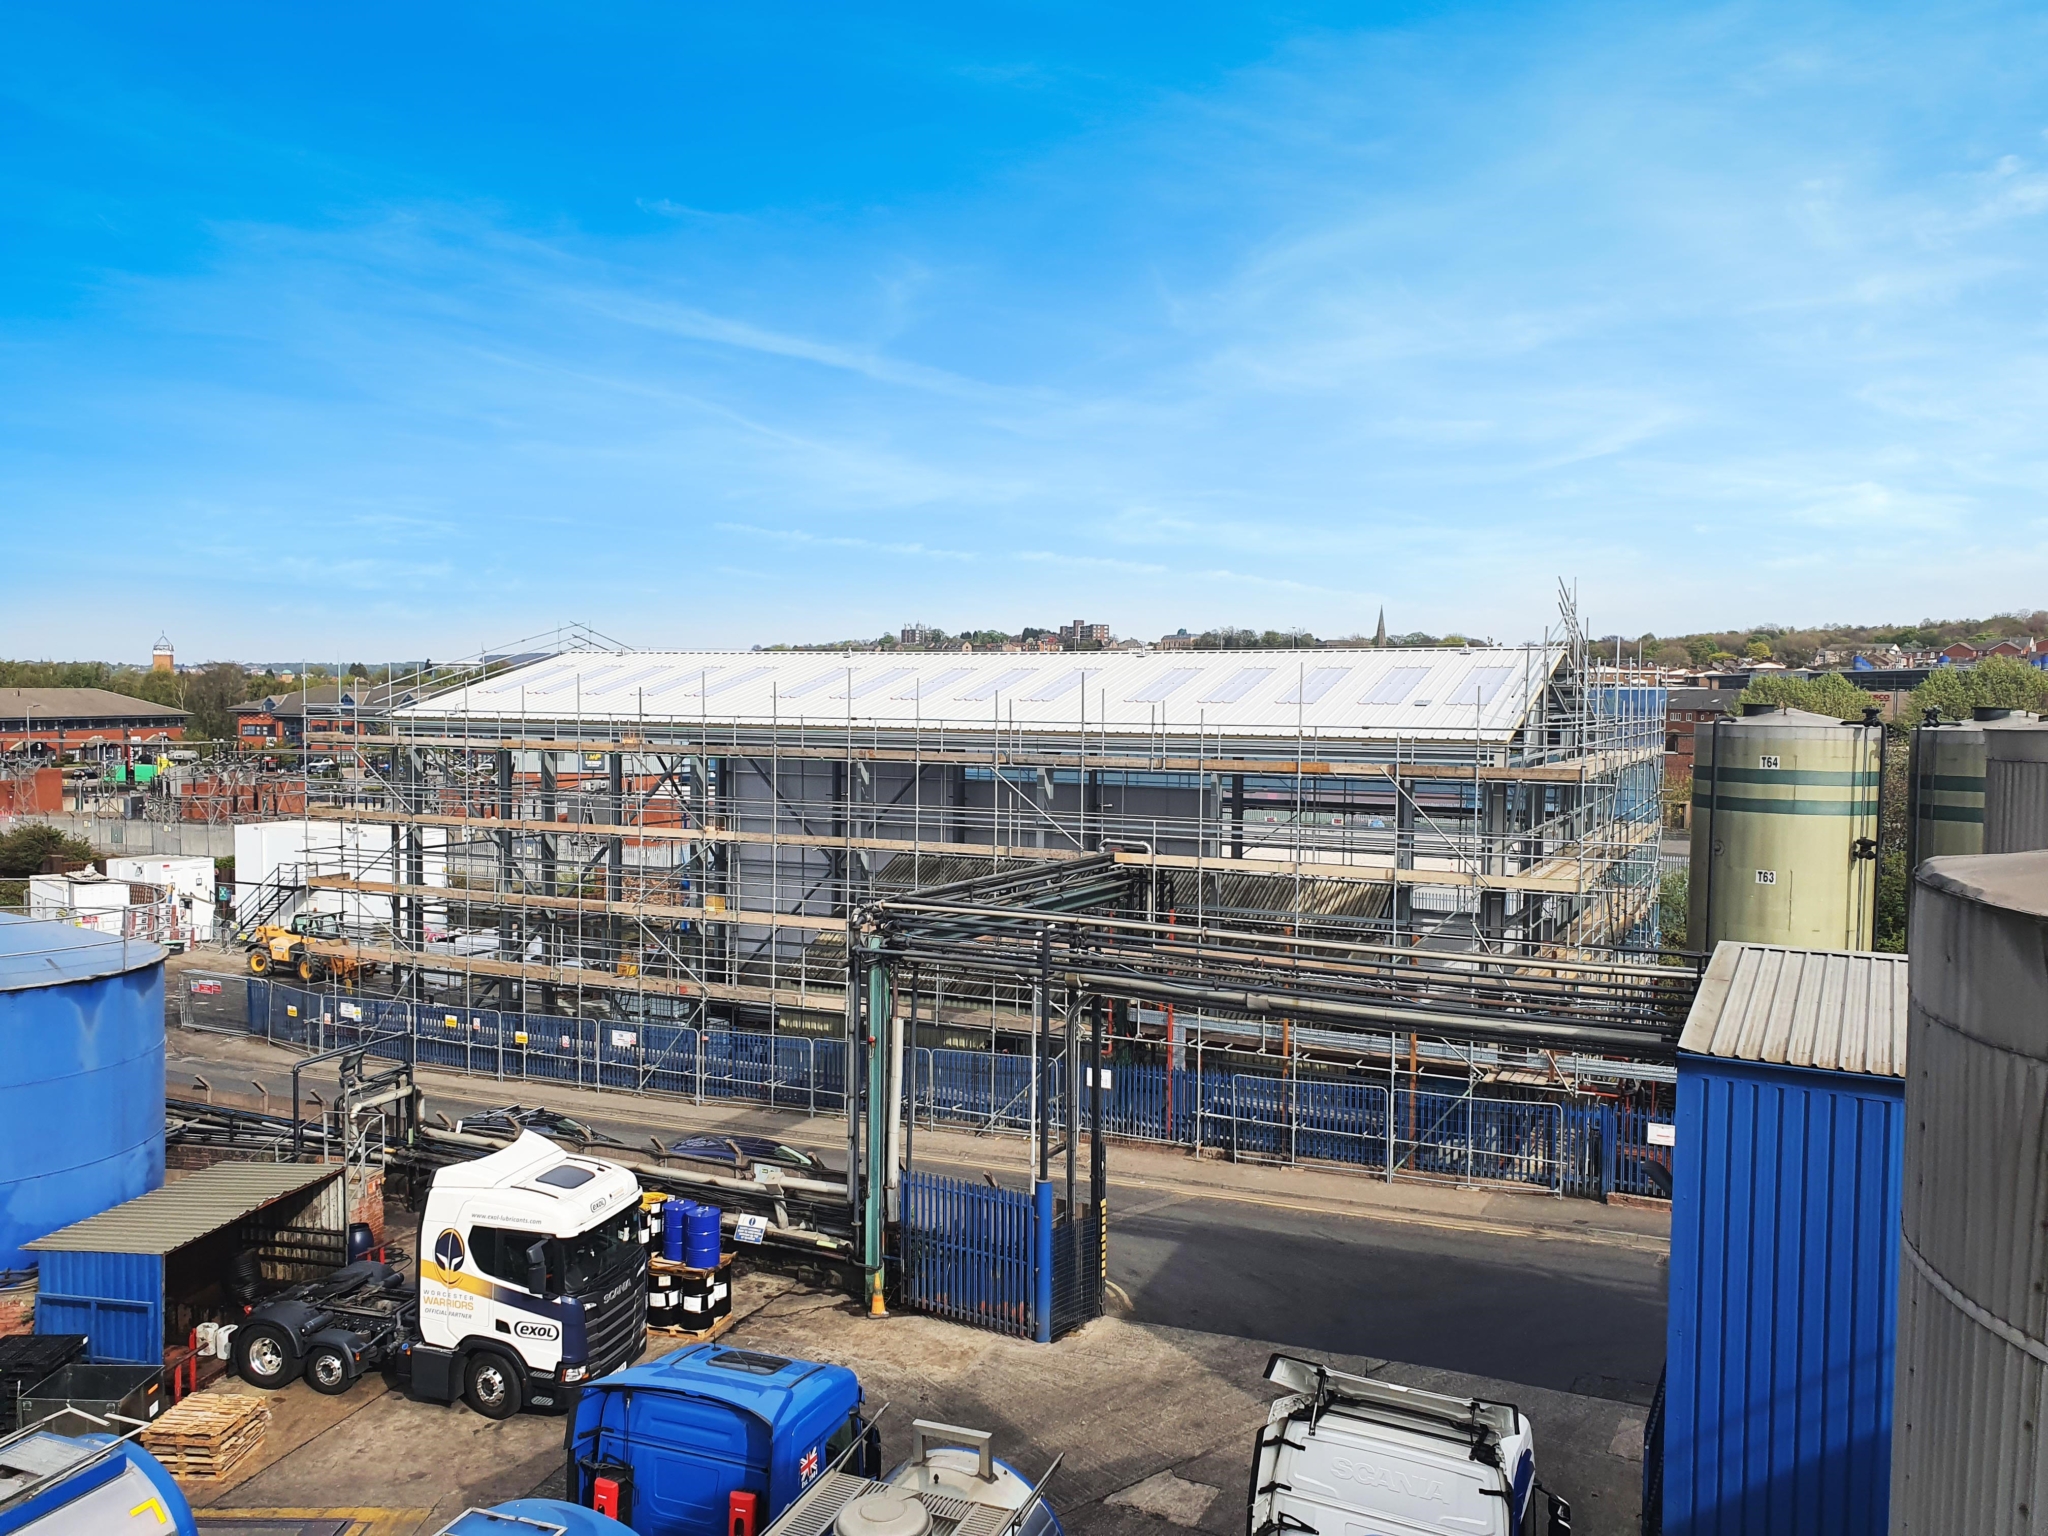 Exol invests in expanded Rotherham site